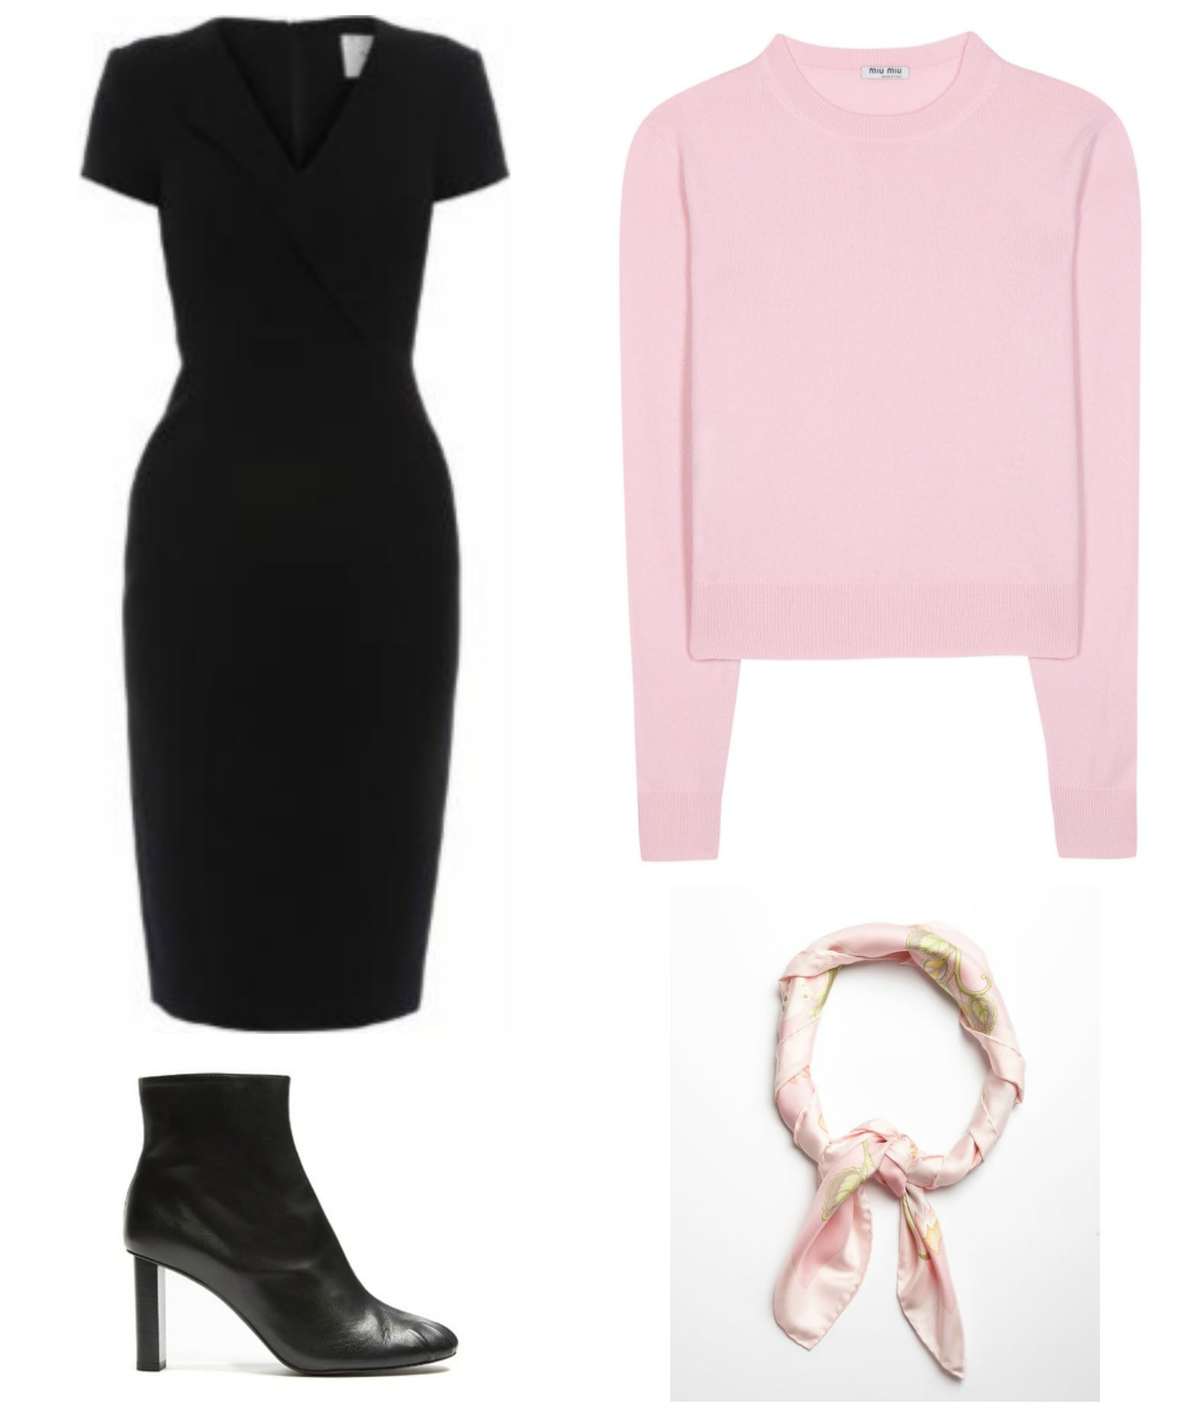 outfit37